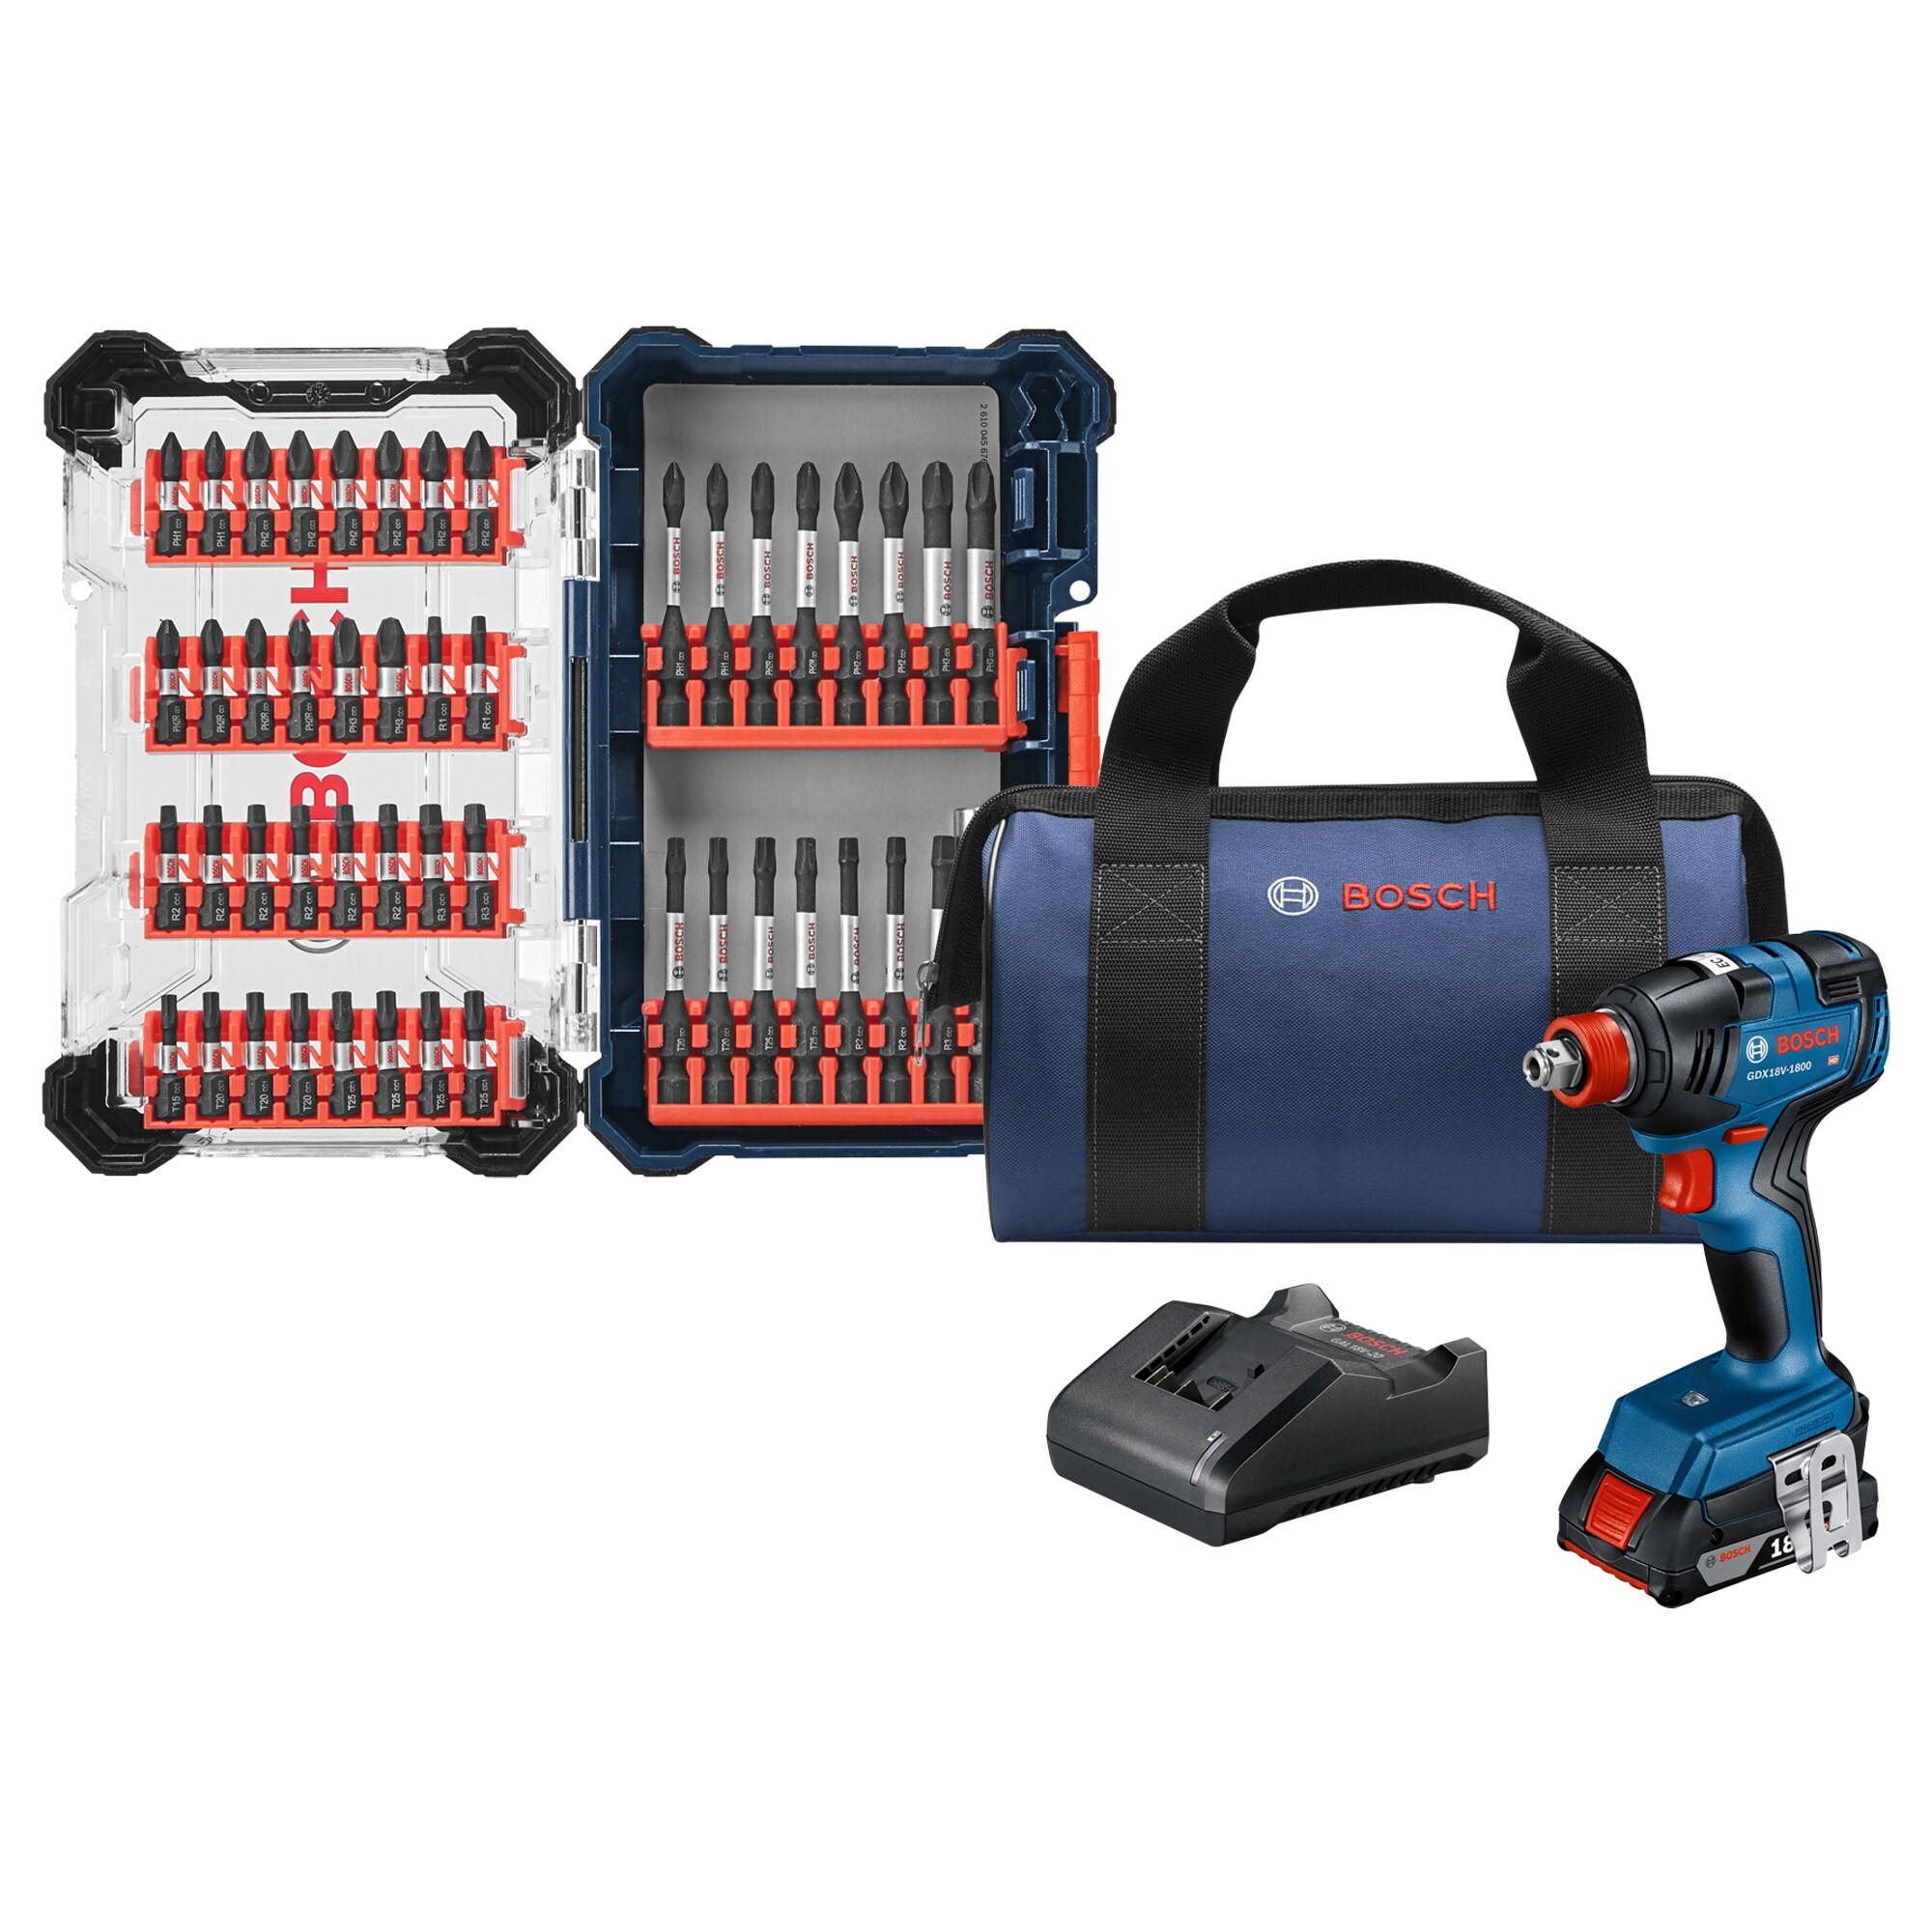 Bosch 18V Brushless 2-Tool Kit w/ Hammer Drill/2-in1 Impact Driver/ with 2x2.0ah Batteries, Charger and Bag + 48-Piece 1/4-in Impact Driver Bit Set